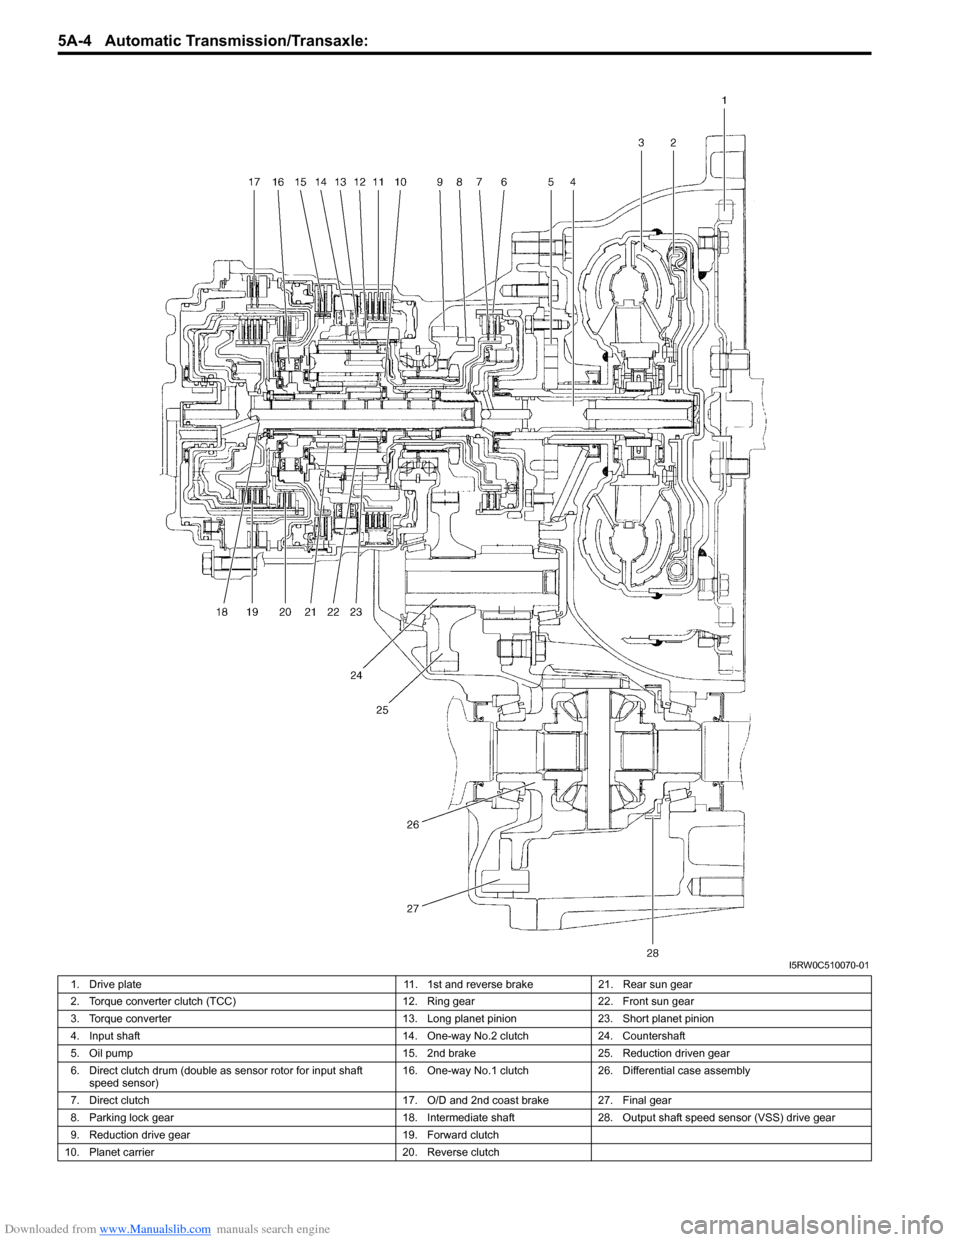 SUZUKI SX4 2006 1.G Service User Guide Downloaded from www.Manualslib.com manuals search engine 5A-4 Automatic Transmission/Transaxle: 
I5RW0C510070-01
1. Drive plate 11. 1st and reverse brake 21. Rear sun gear
2. Torque converter clutch (